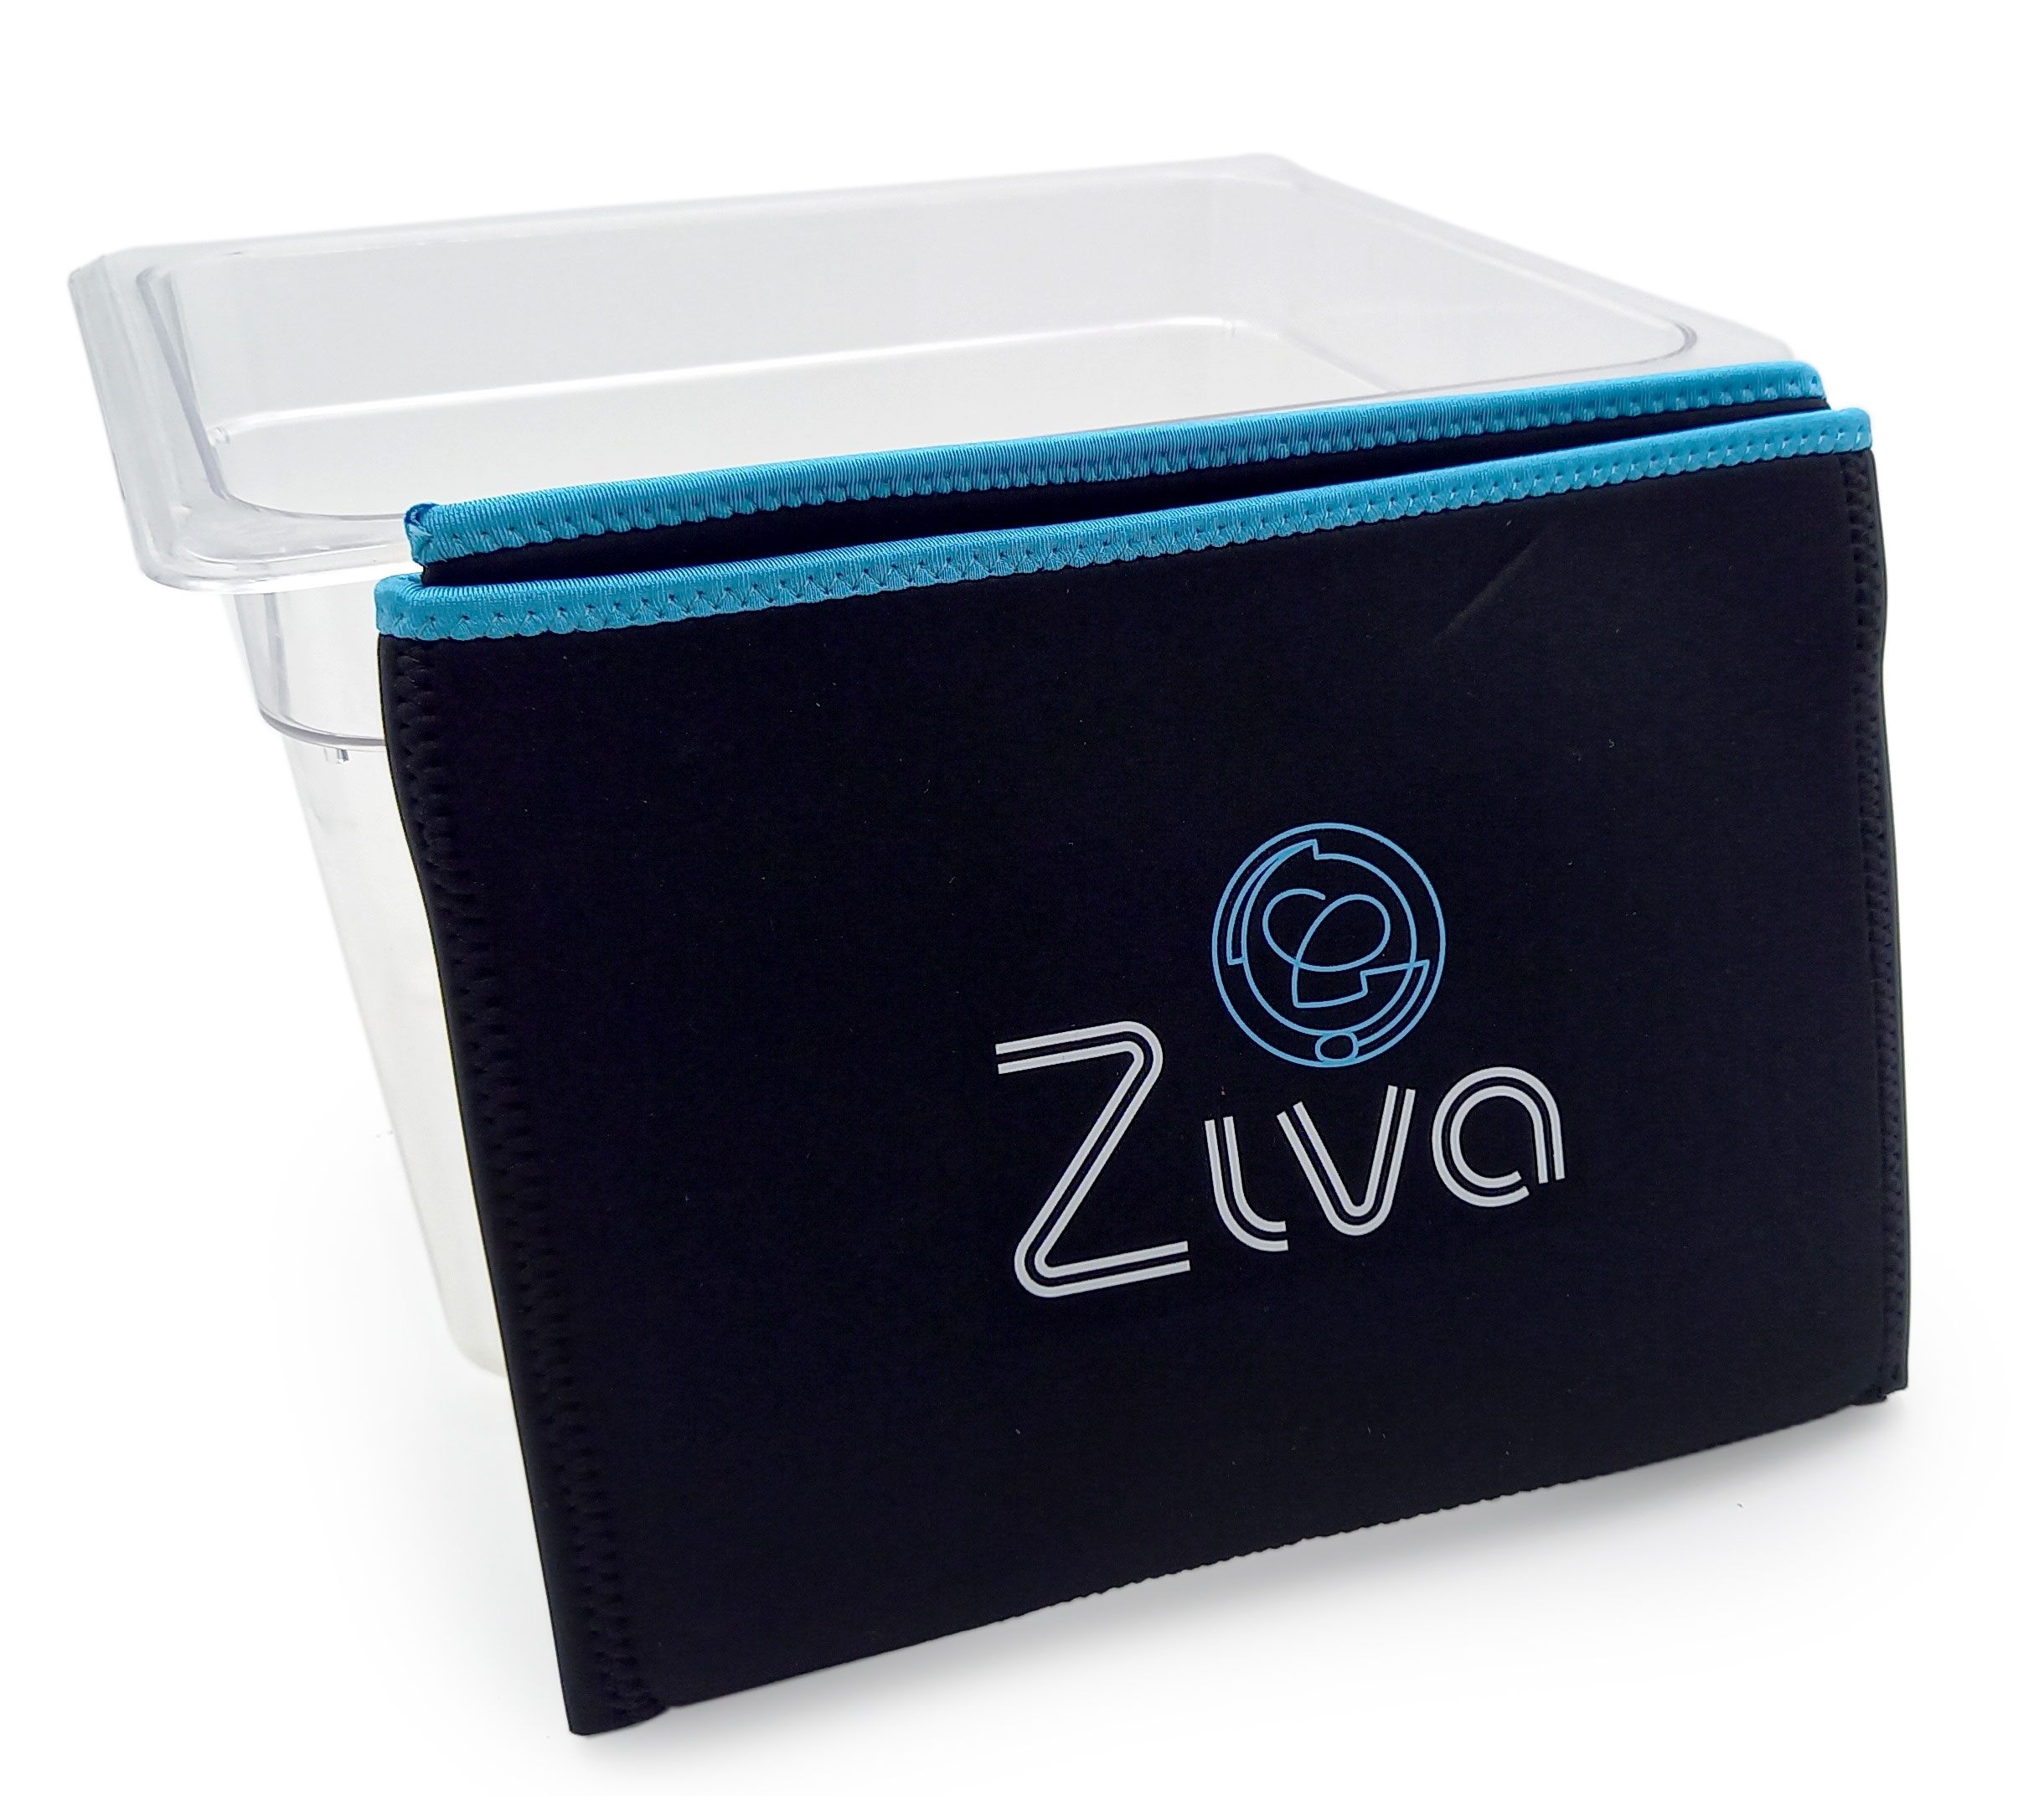 Ziva XLarge sous-vide container + lid [CLONE] [CLONE] [CLONE]